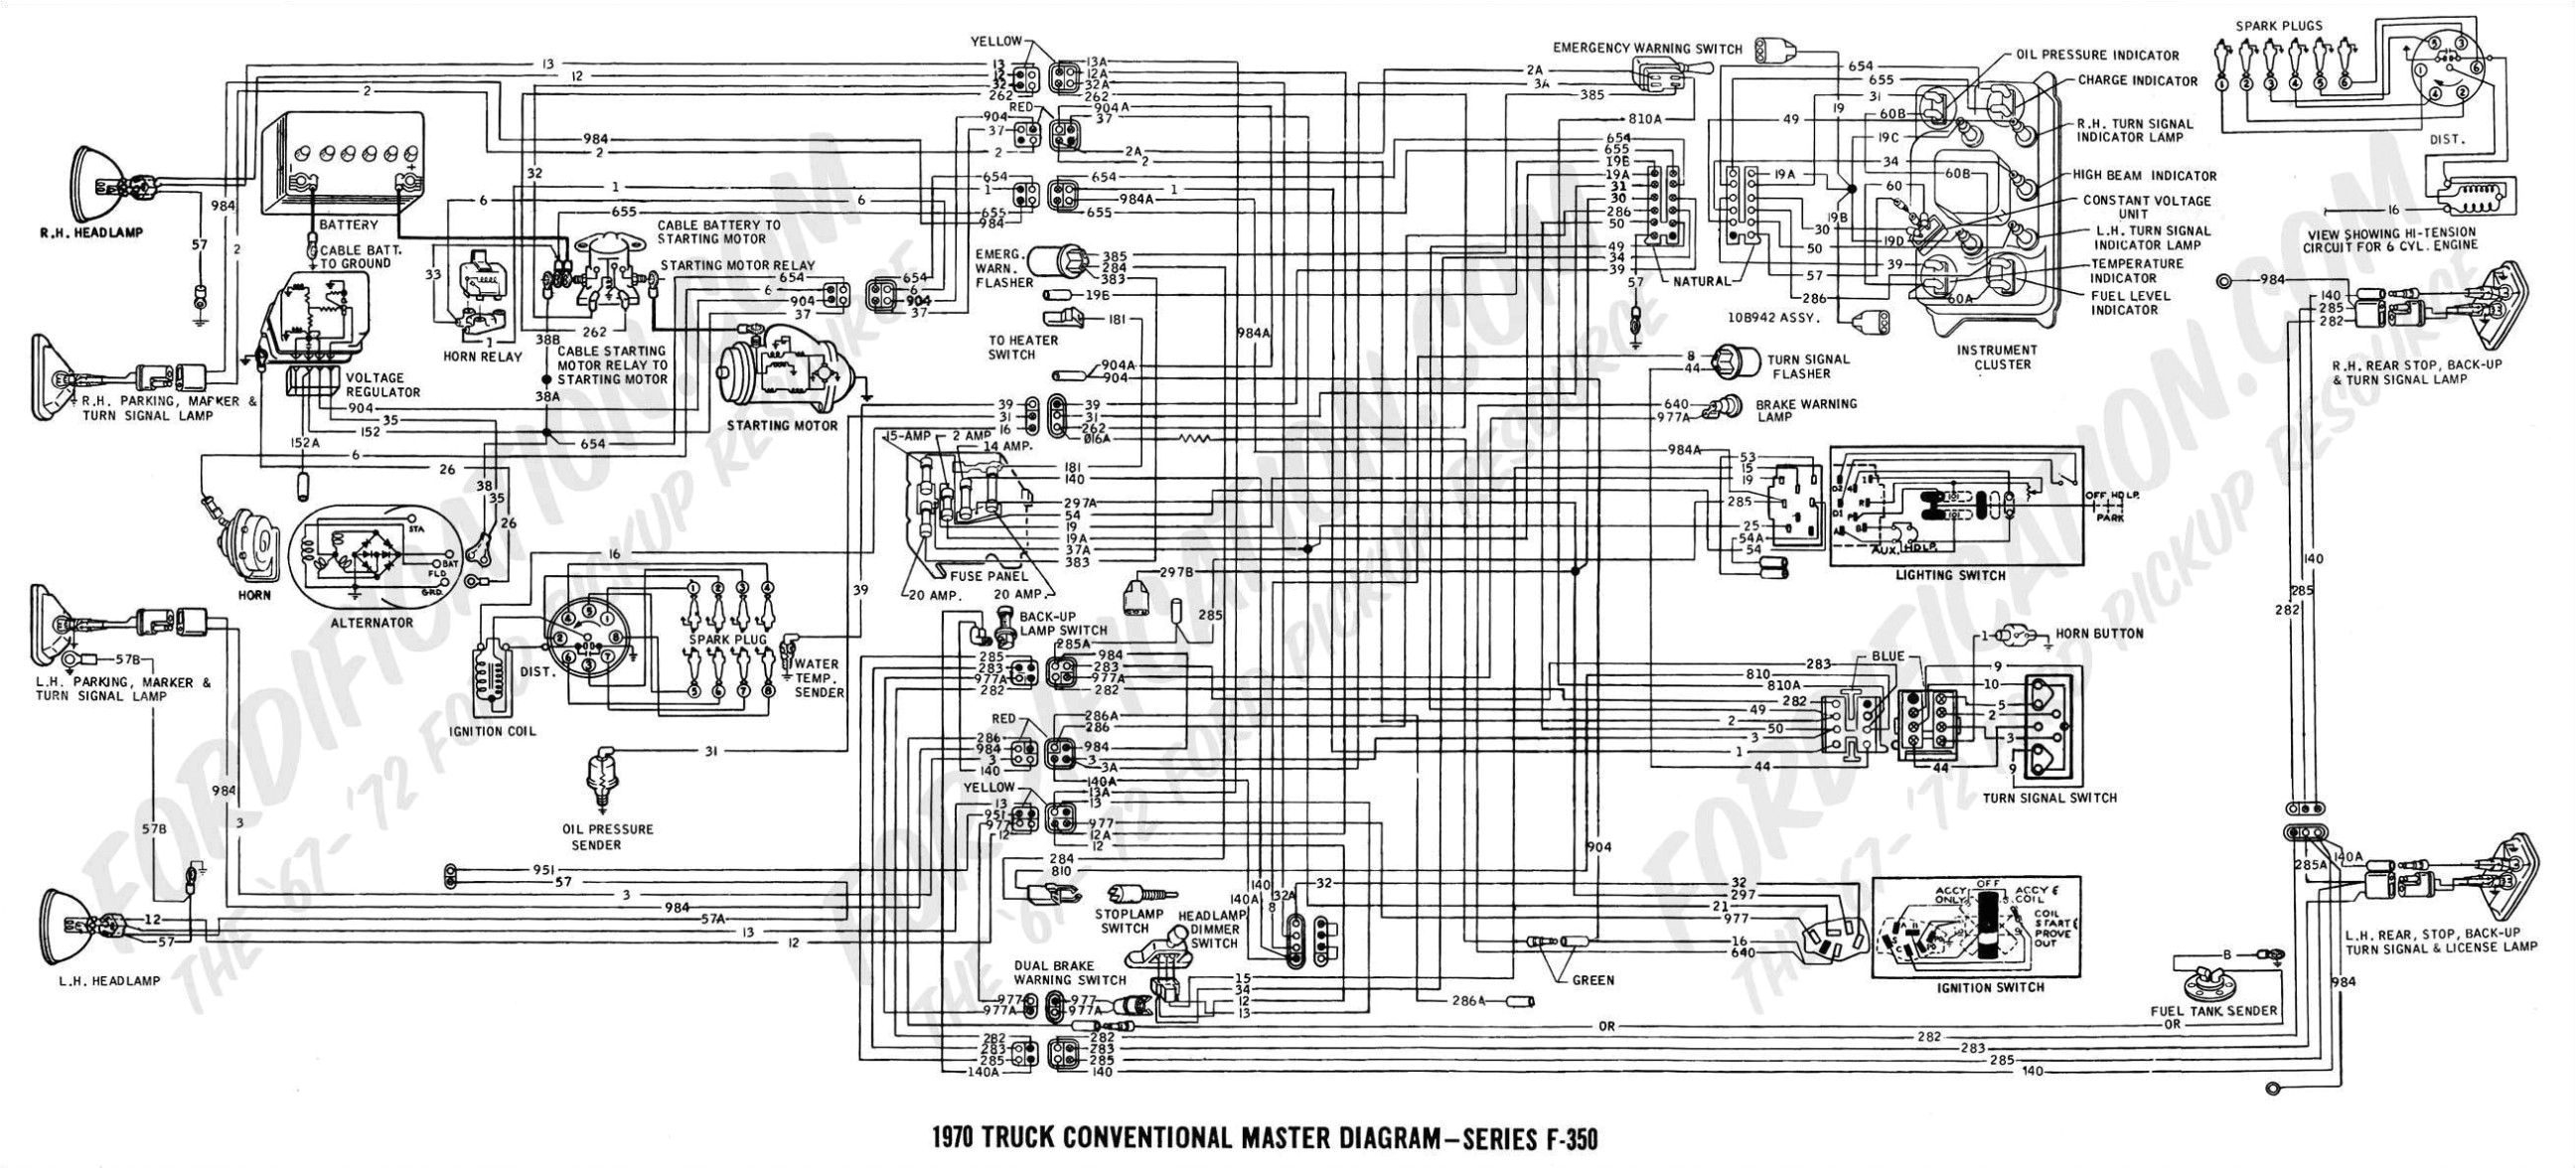 ford e350 wiring harness wiring diagrams posts 1994 e350 wiring diagram